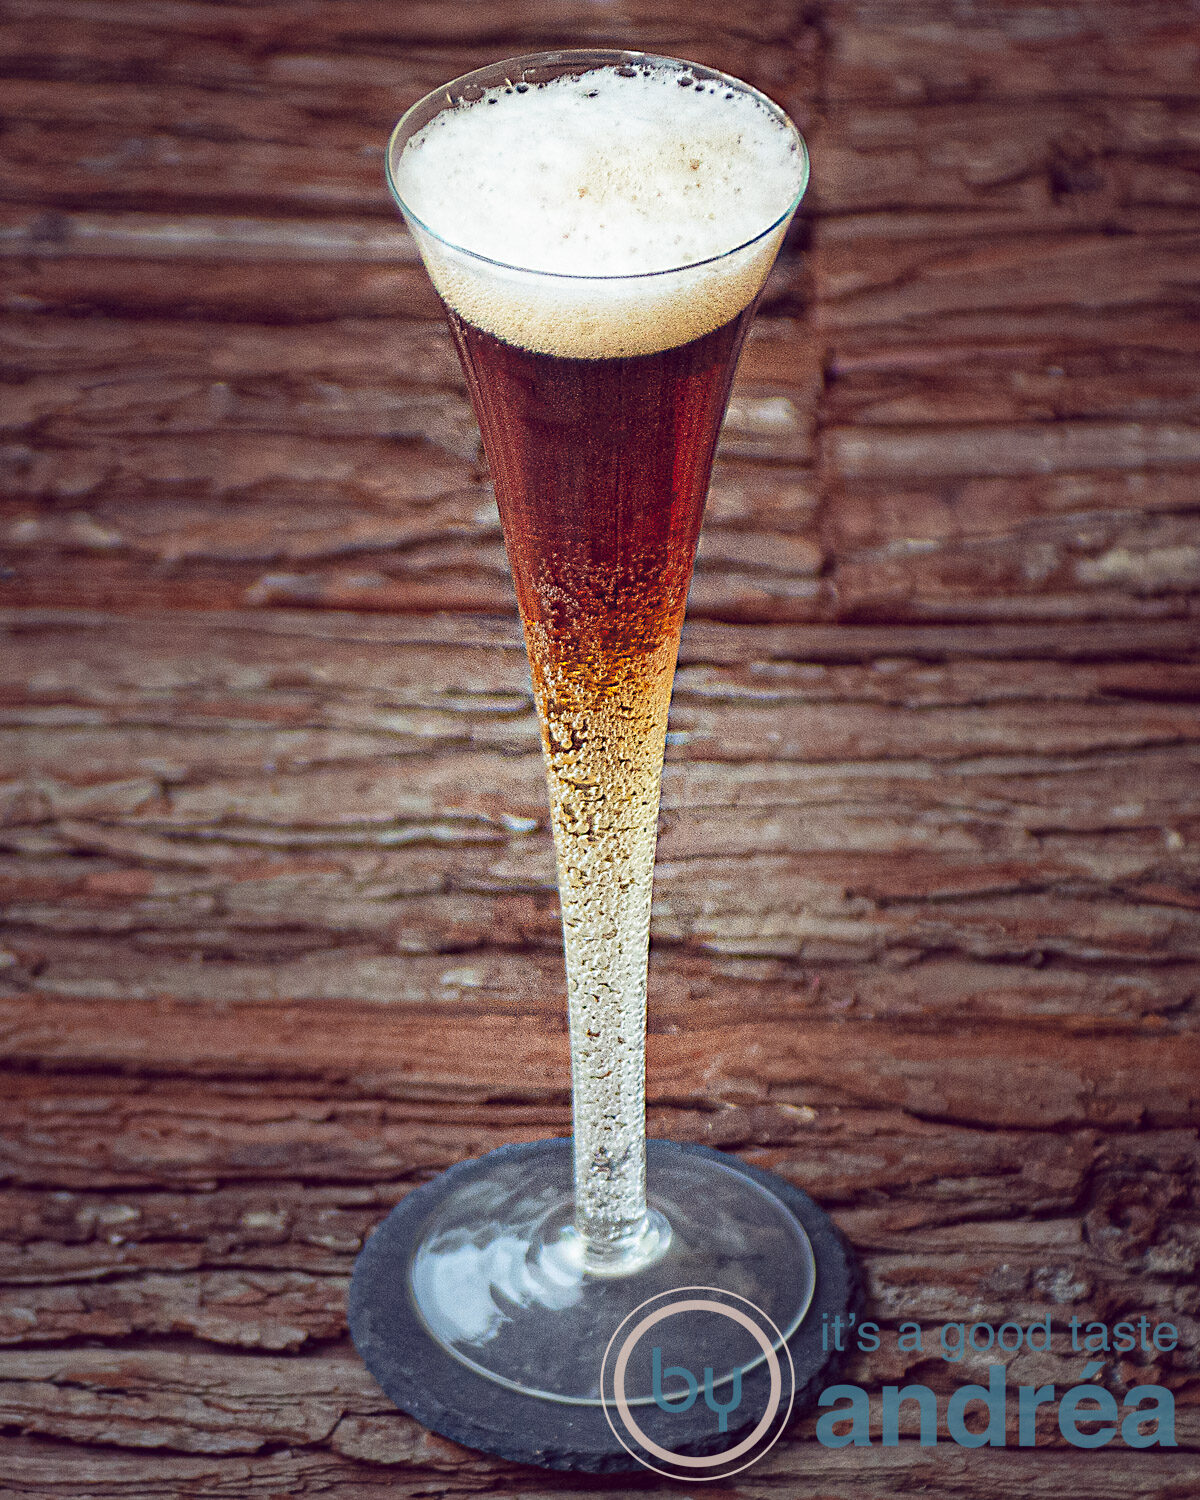 Beer cocktail in a cocktail glasses, with two layers (light and dark) on a wooden background